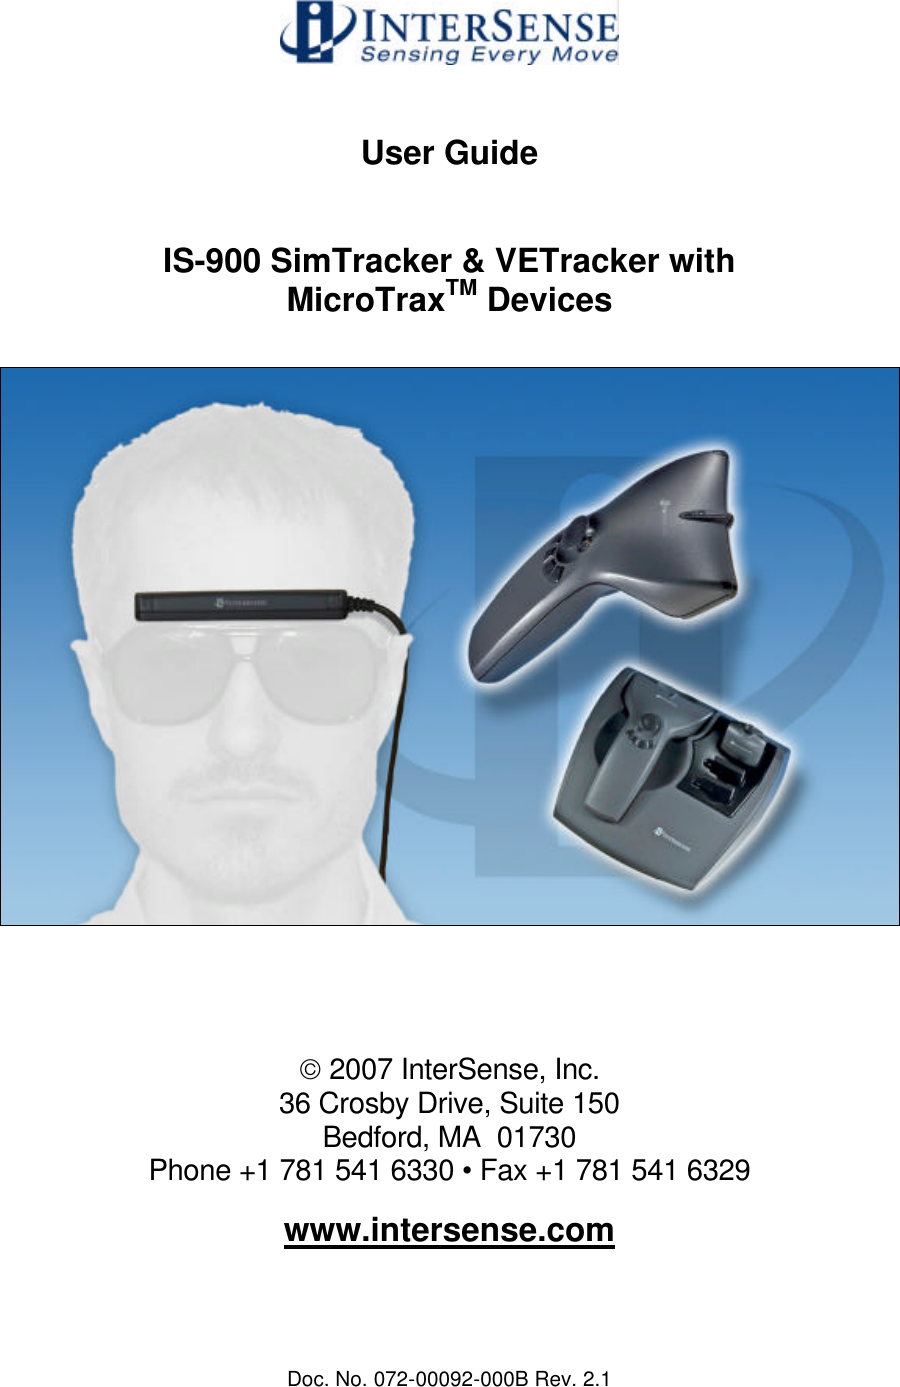 Doc. No. 072-00092-000B Rev. 2.1   User Guide  IS-900 SimTracker &amp; VETracker with MicroTraxTM Devices         2007 InterSense, Inc. 36 Crosby Drive, Suite 150 Bedford, MA  01730 Phone +1 781 541 6330 • Fax +1 781 541 6329  www.intersense.com 